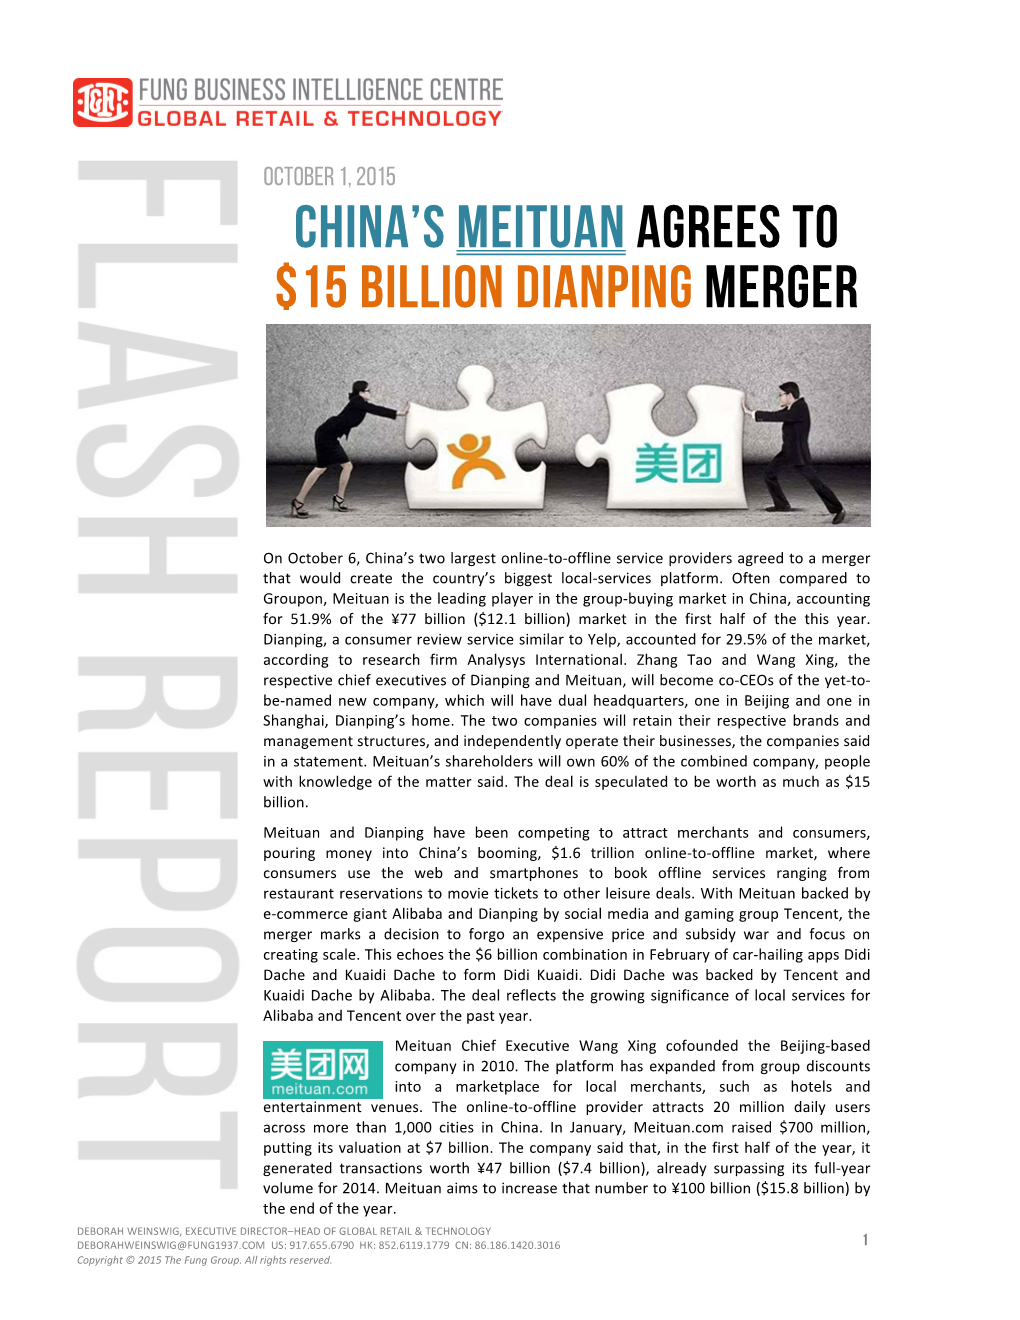 China's Meituan Agrees to $15 Billion Dianping Merger